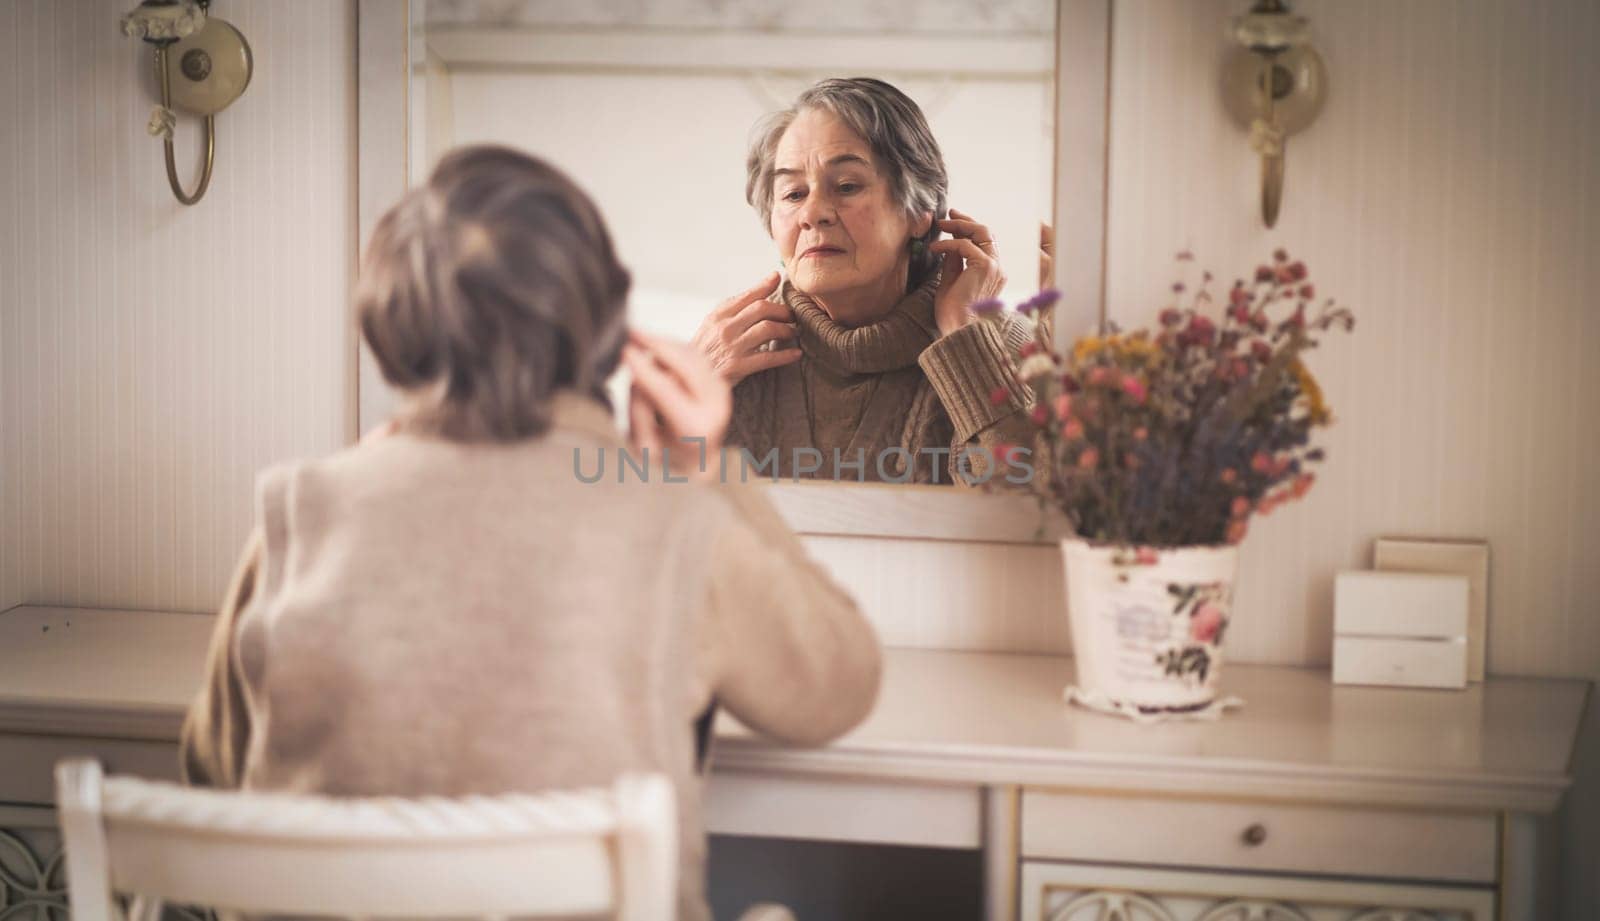 An elderly smiling woman of 80+ years of age spends a good time at home, a grandmother takes care of her appearance, looks in the mirror, sits at a dressing table in her bedroom.